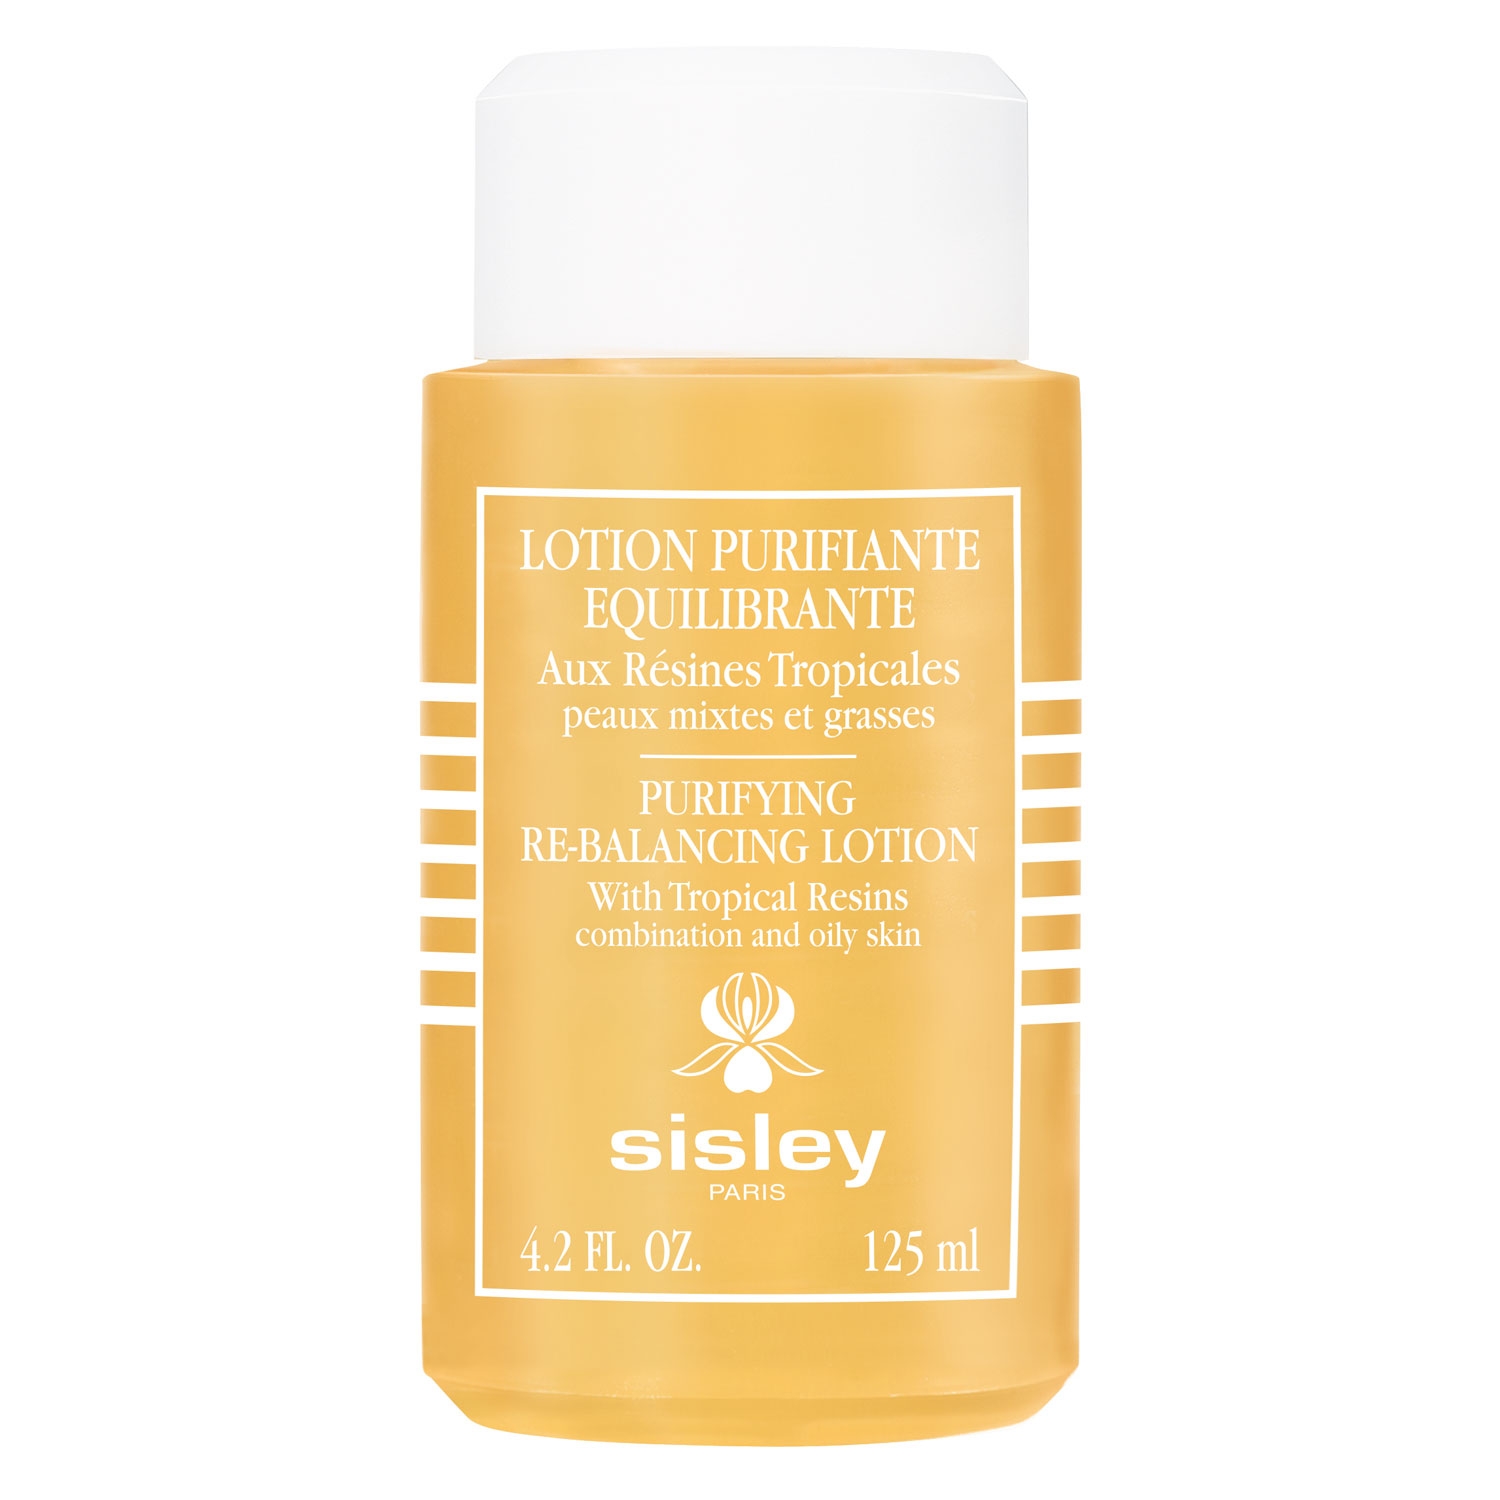 Product image from Sisley Skincare - Lotion Purifiante Equilibrante aux Résines Tropicales